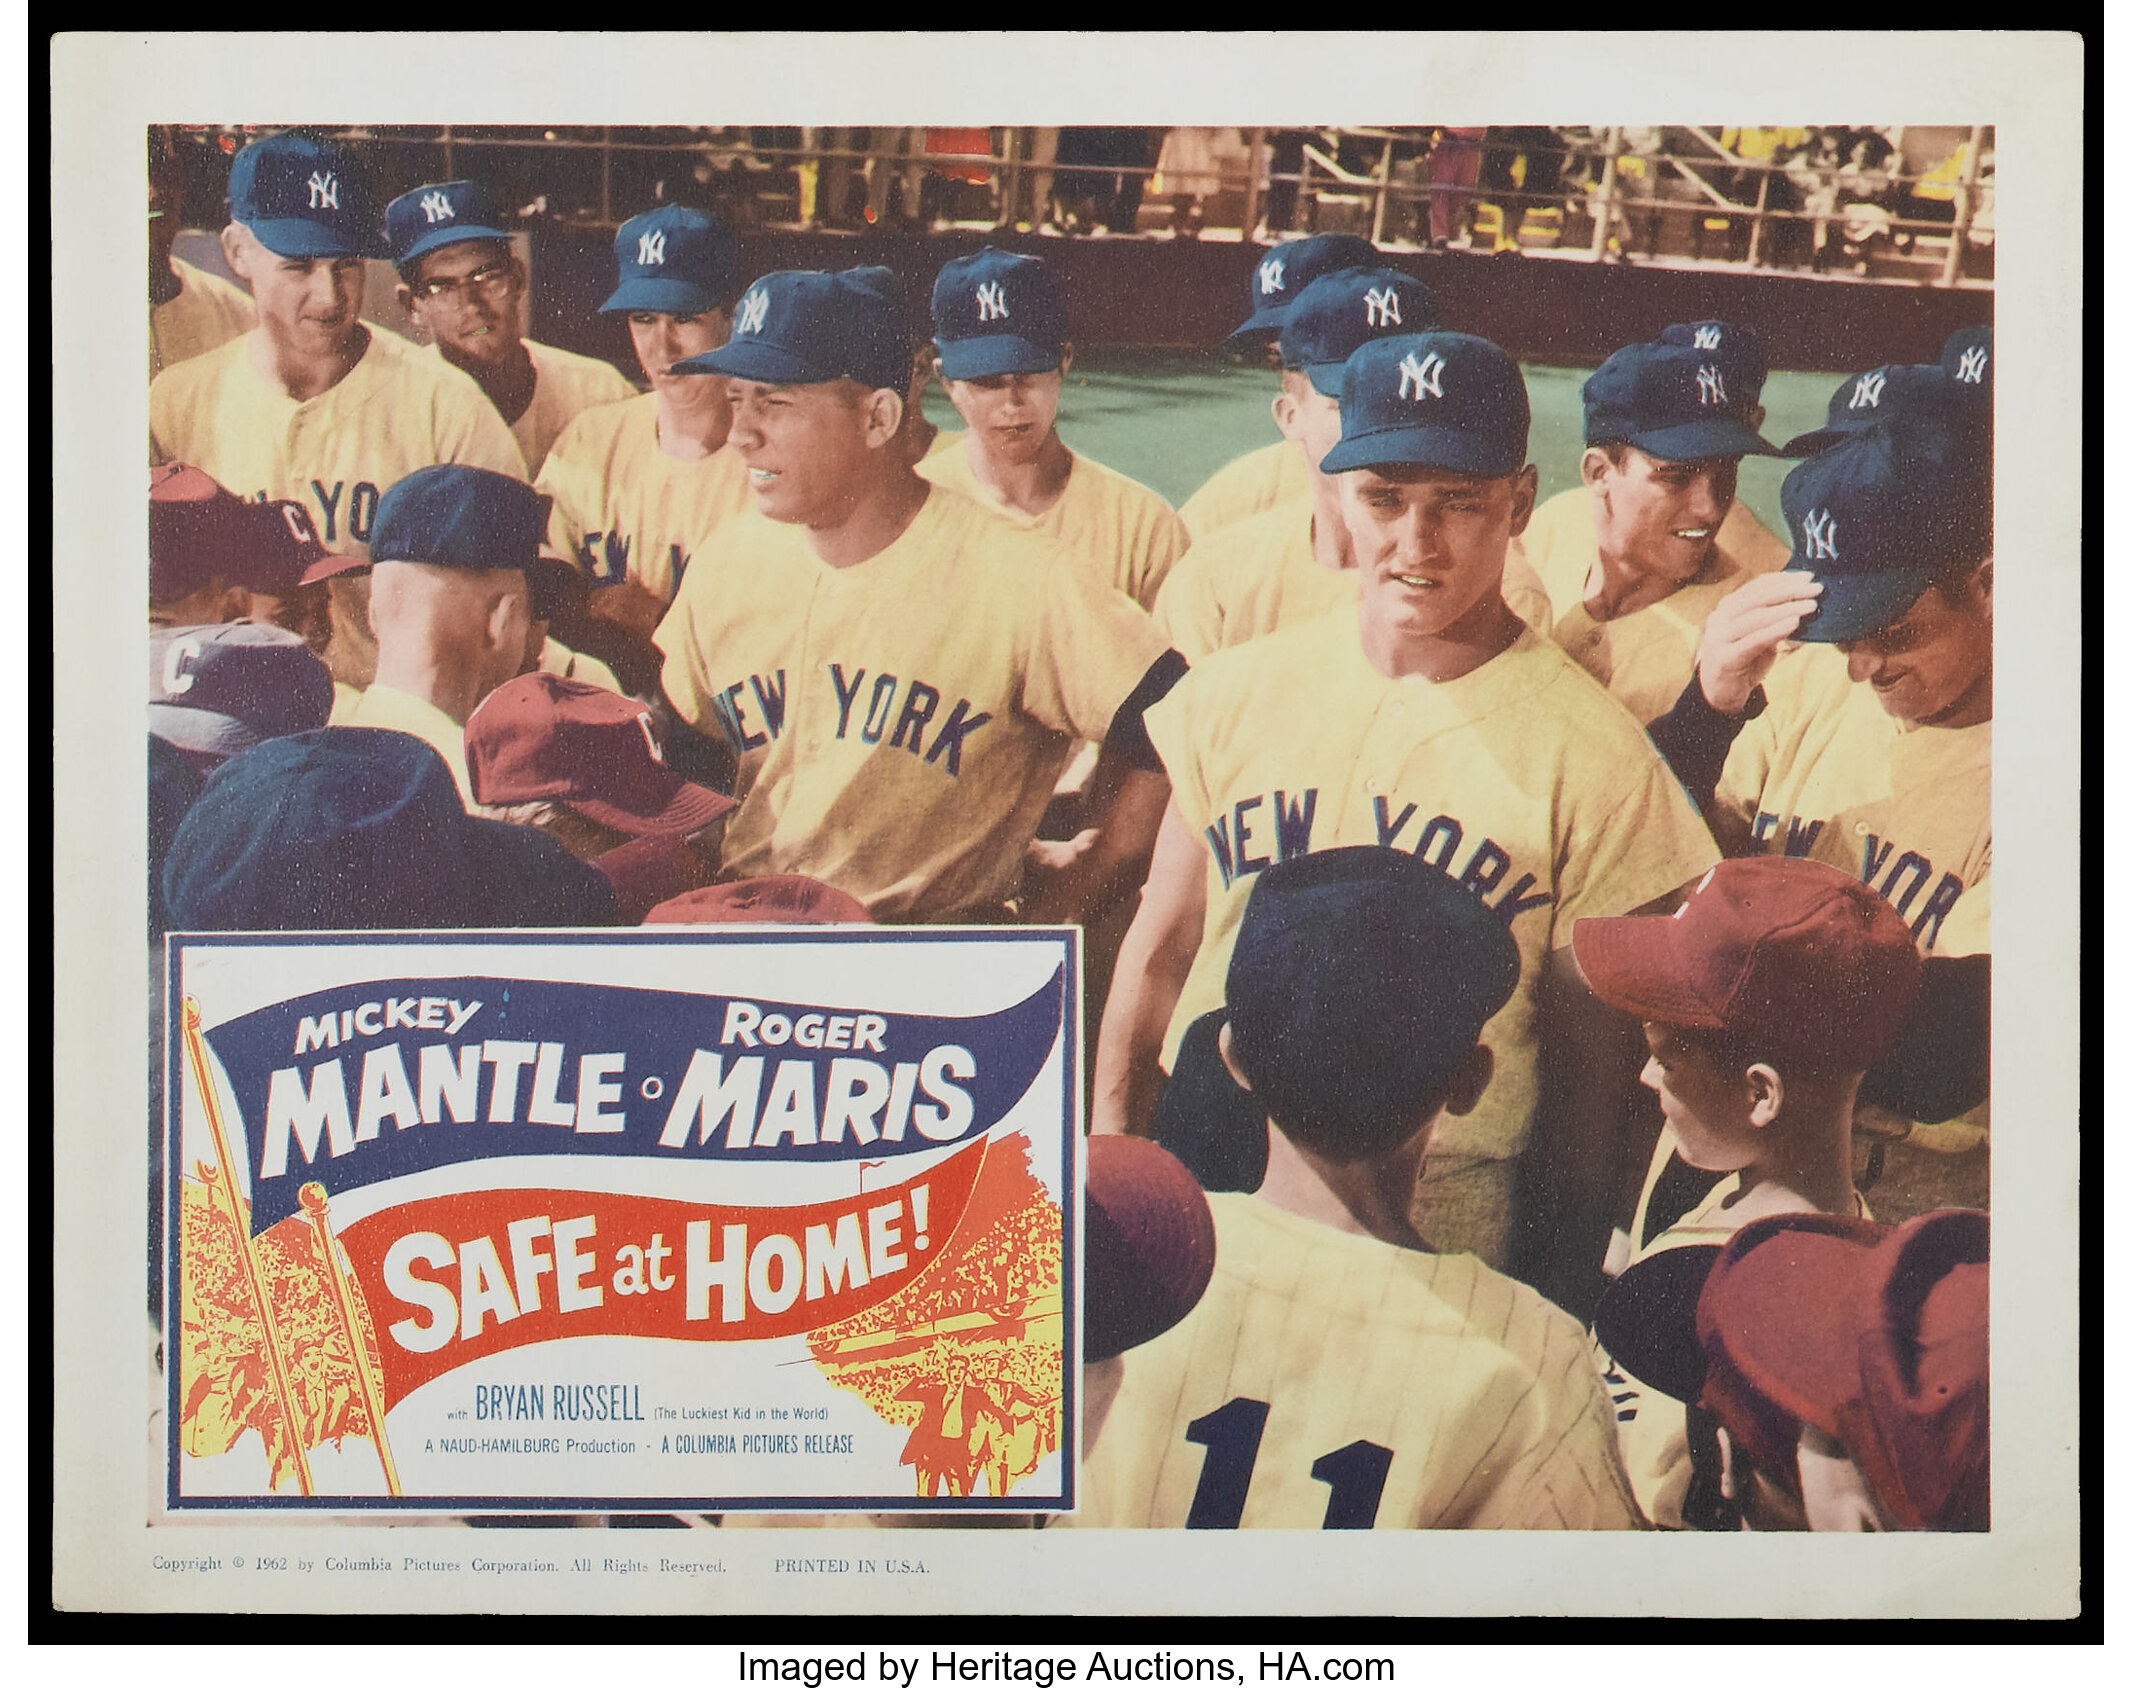 SAFE AT HOME!, Roger Maris, Patricia Barry, Mickey Mantle, 1962